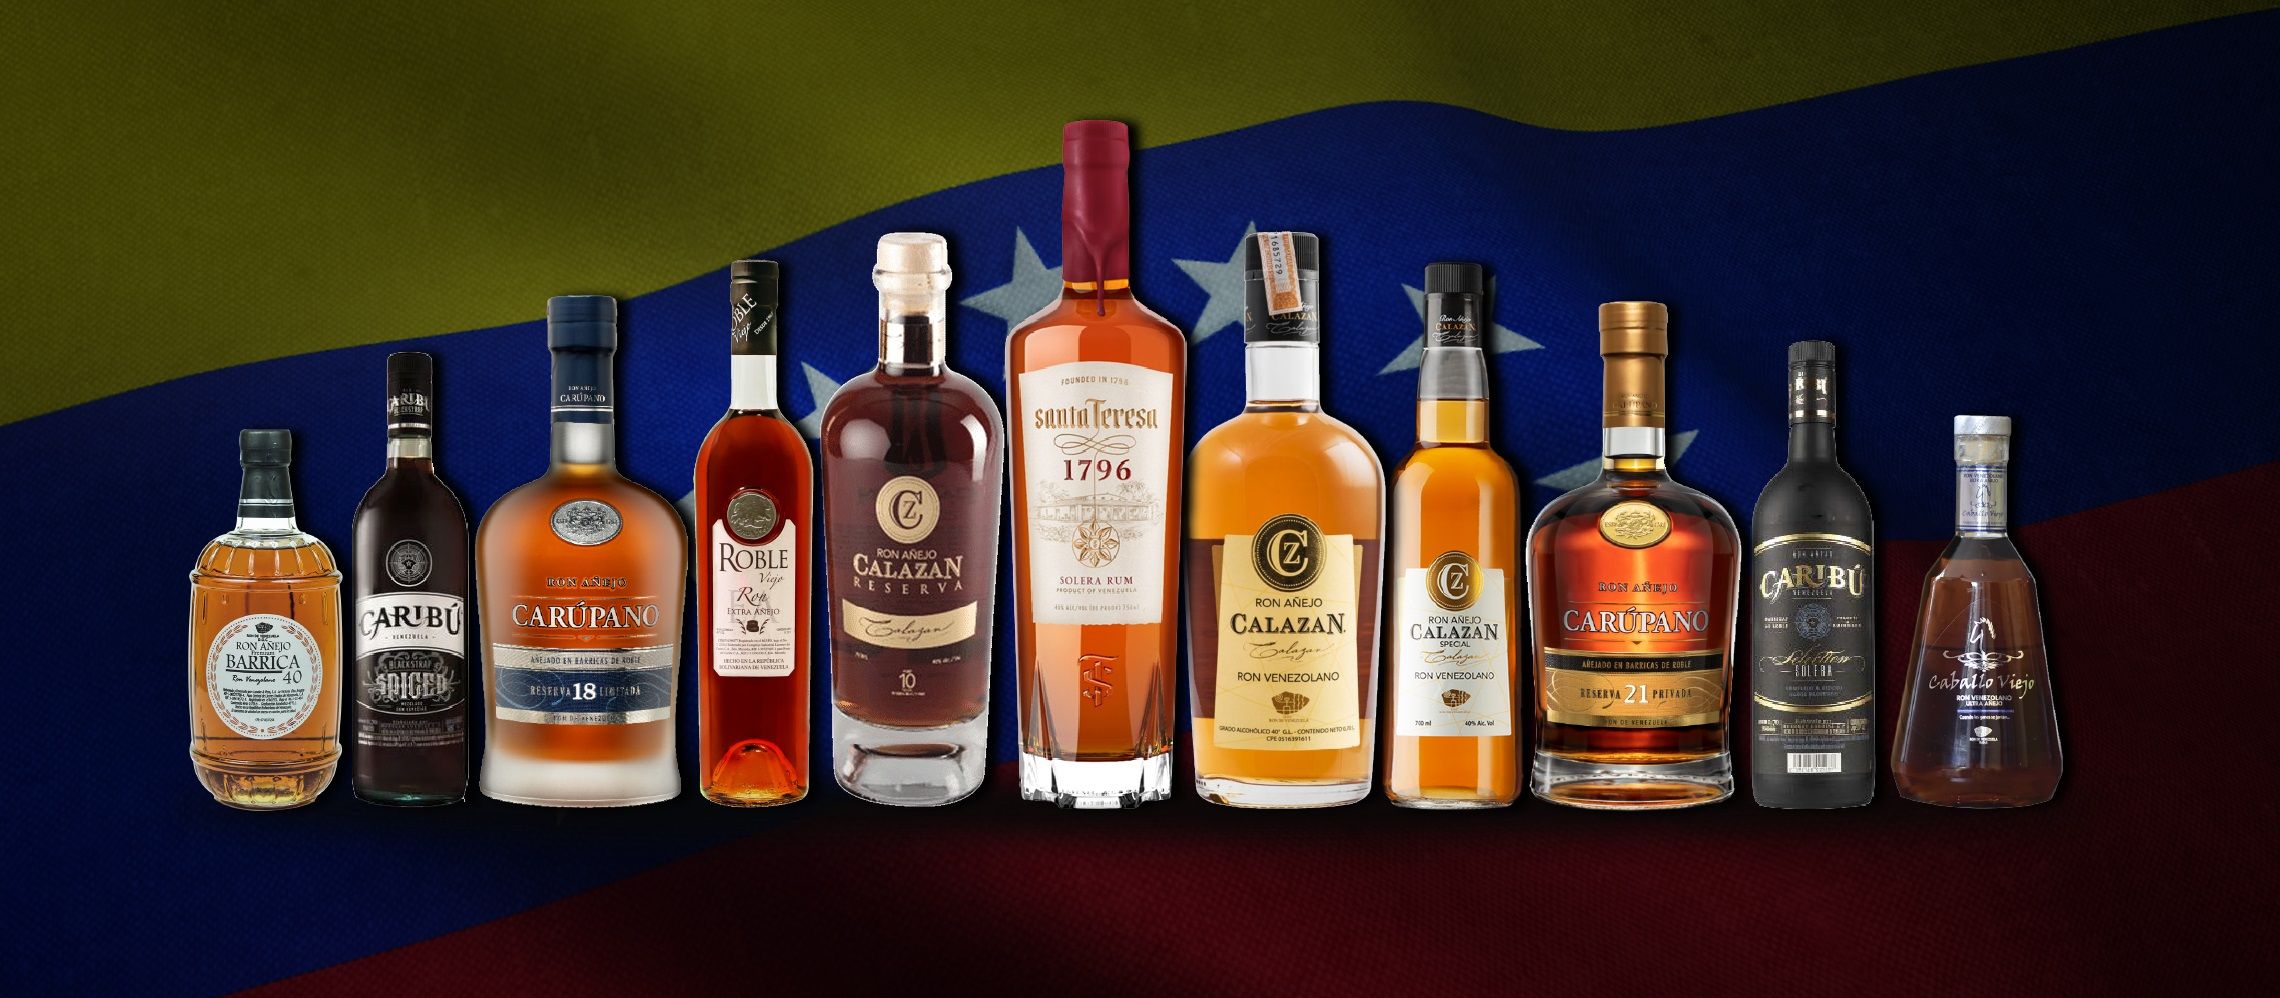 Photo for: 16 Venezuelan Rums You Need To Stock Up